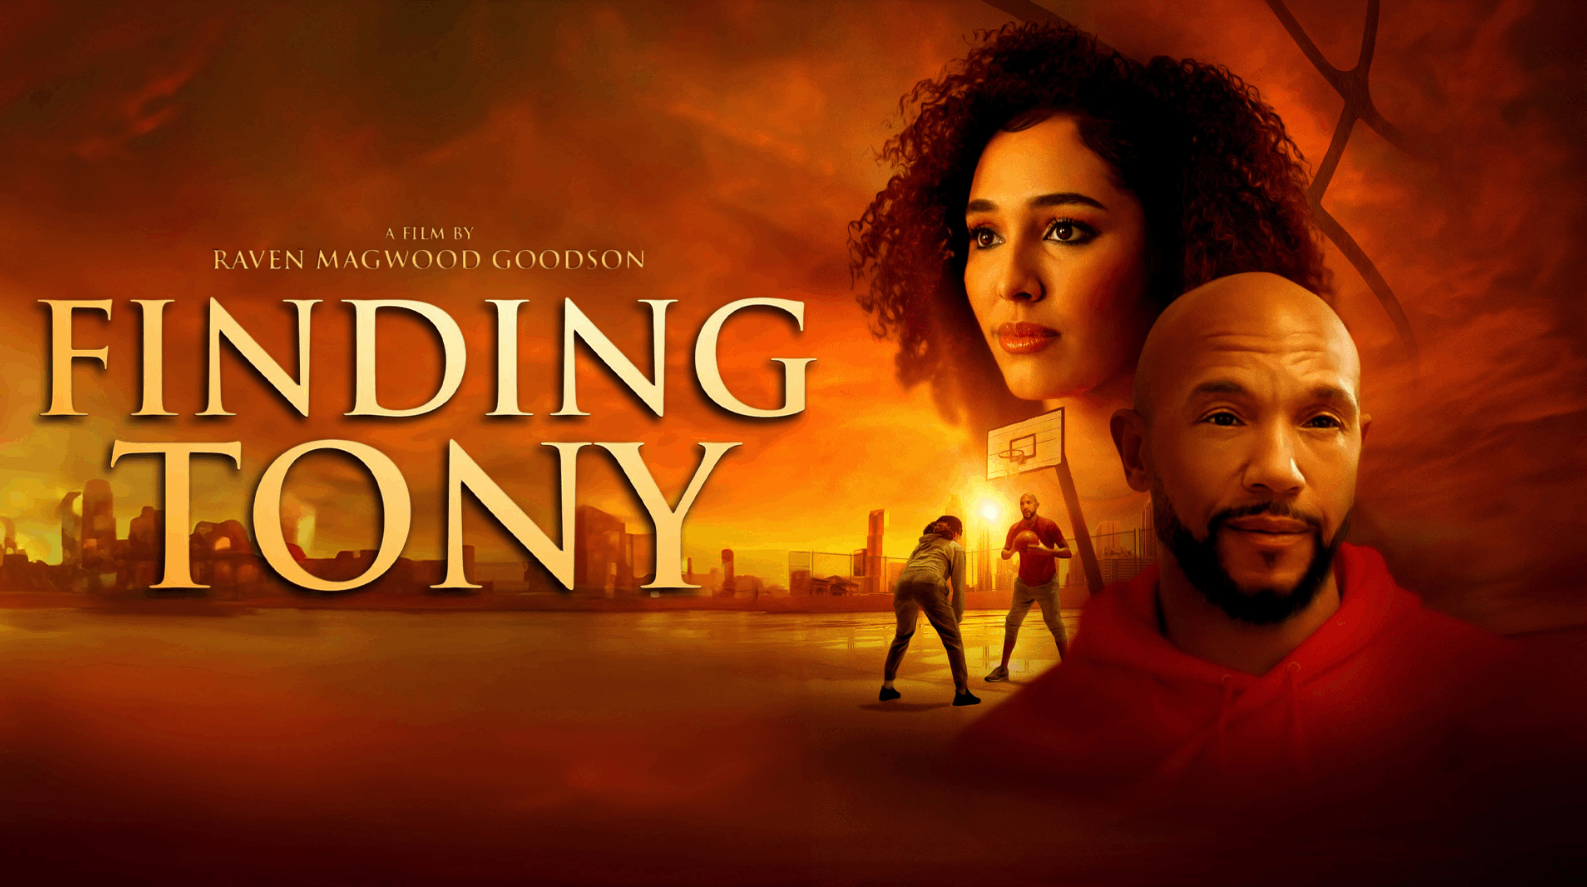 Stephen Bishop and Raven Magwood Goodson on New Movie "Finding Tony"